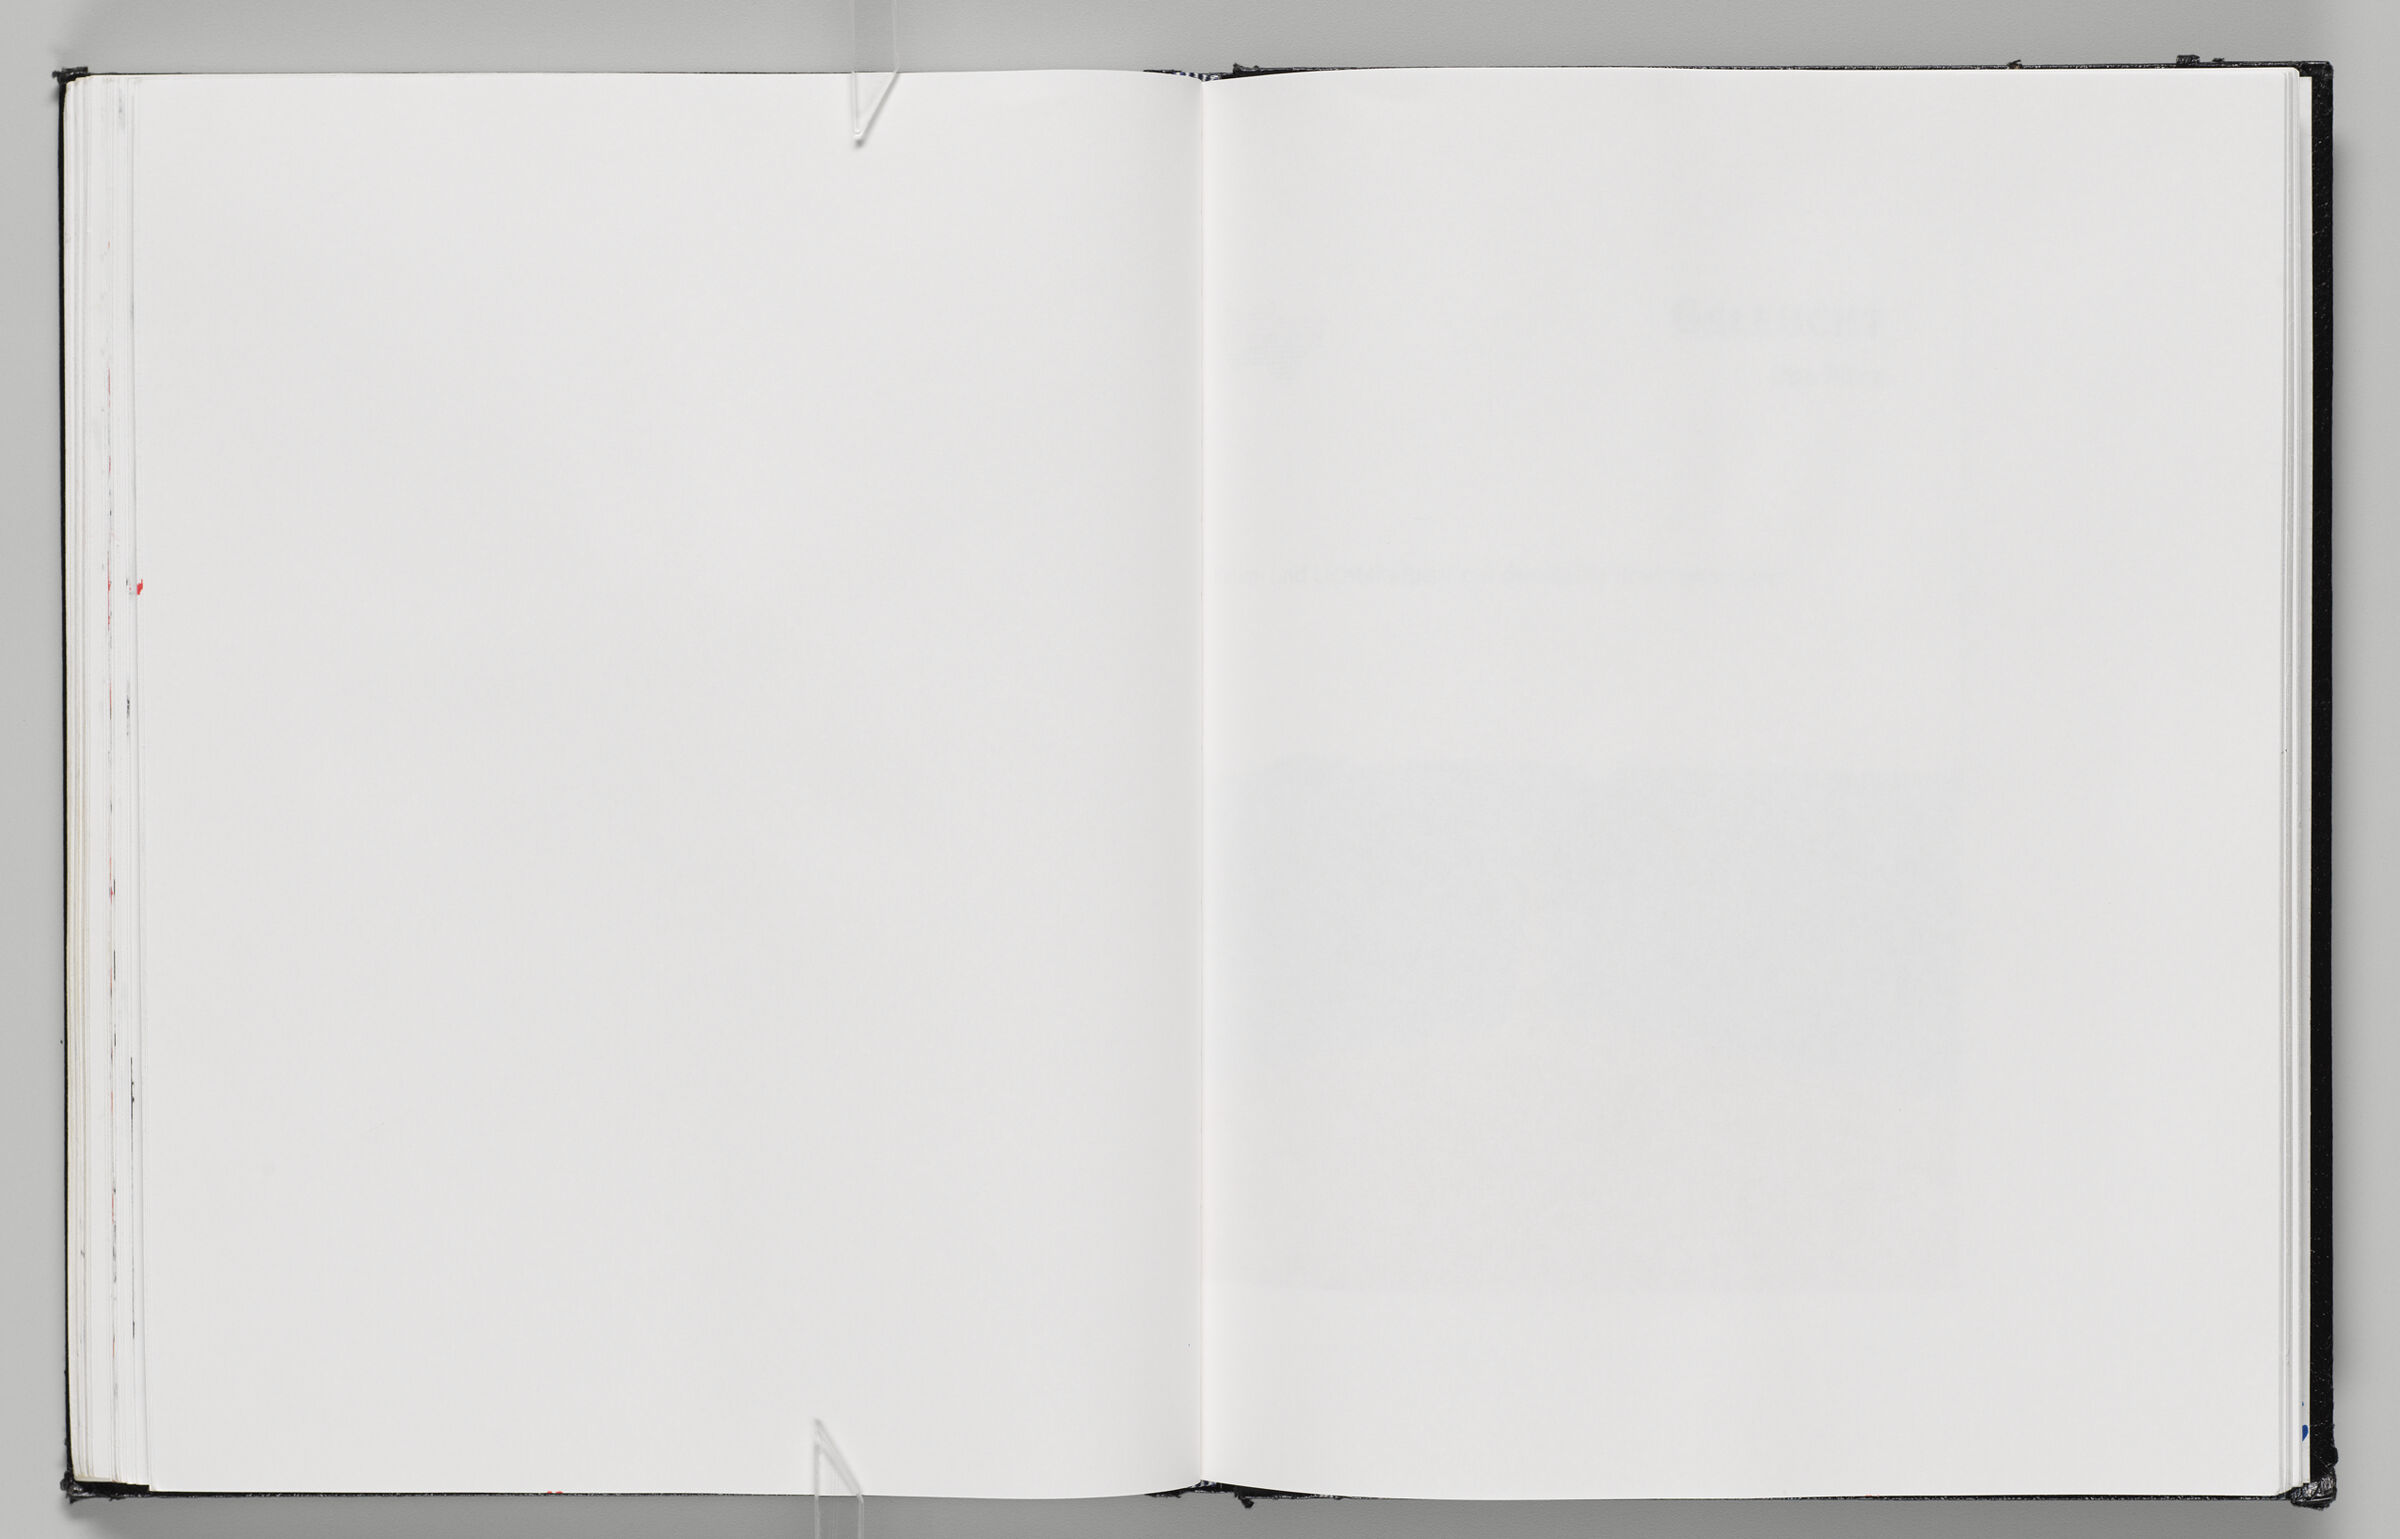 Untitled (Blank, Left Page); Untitled (Blank, Right Page)
